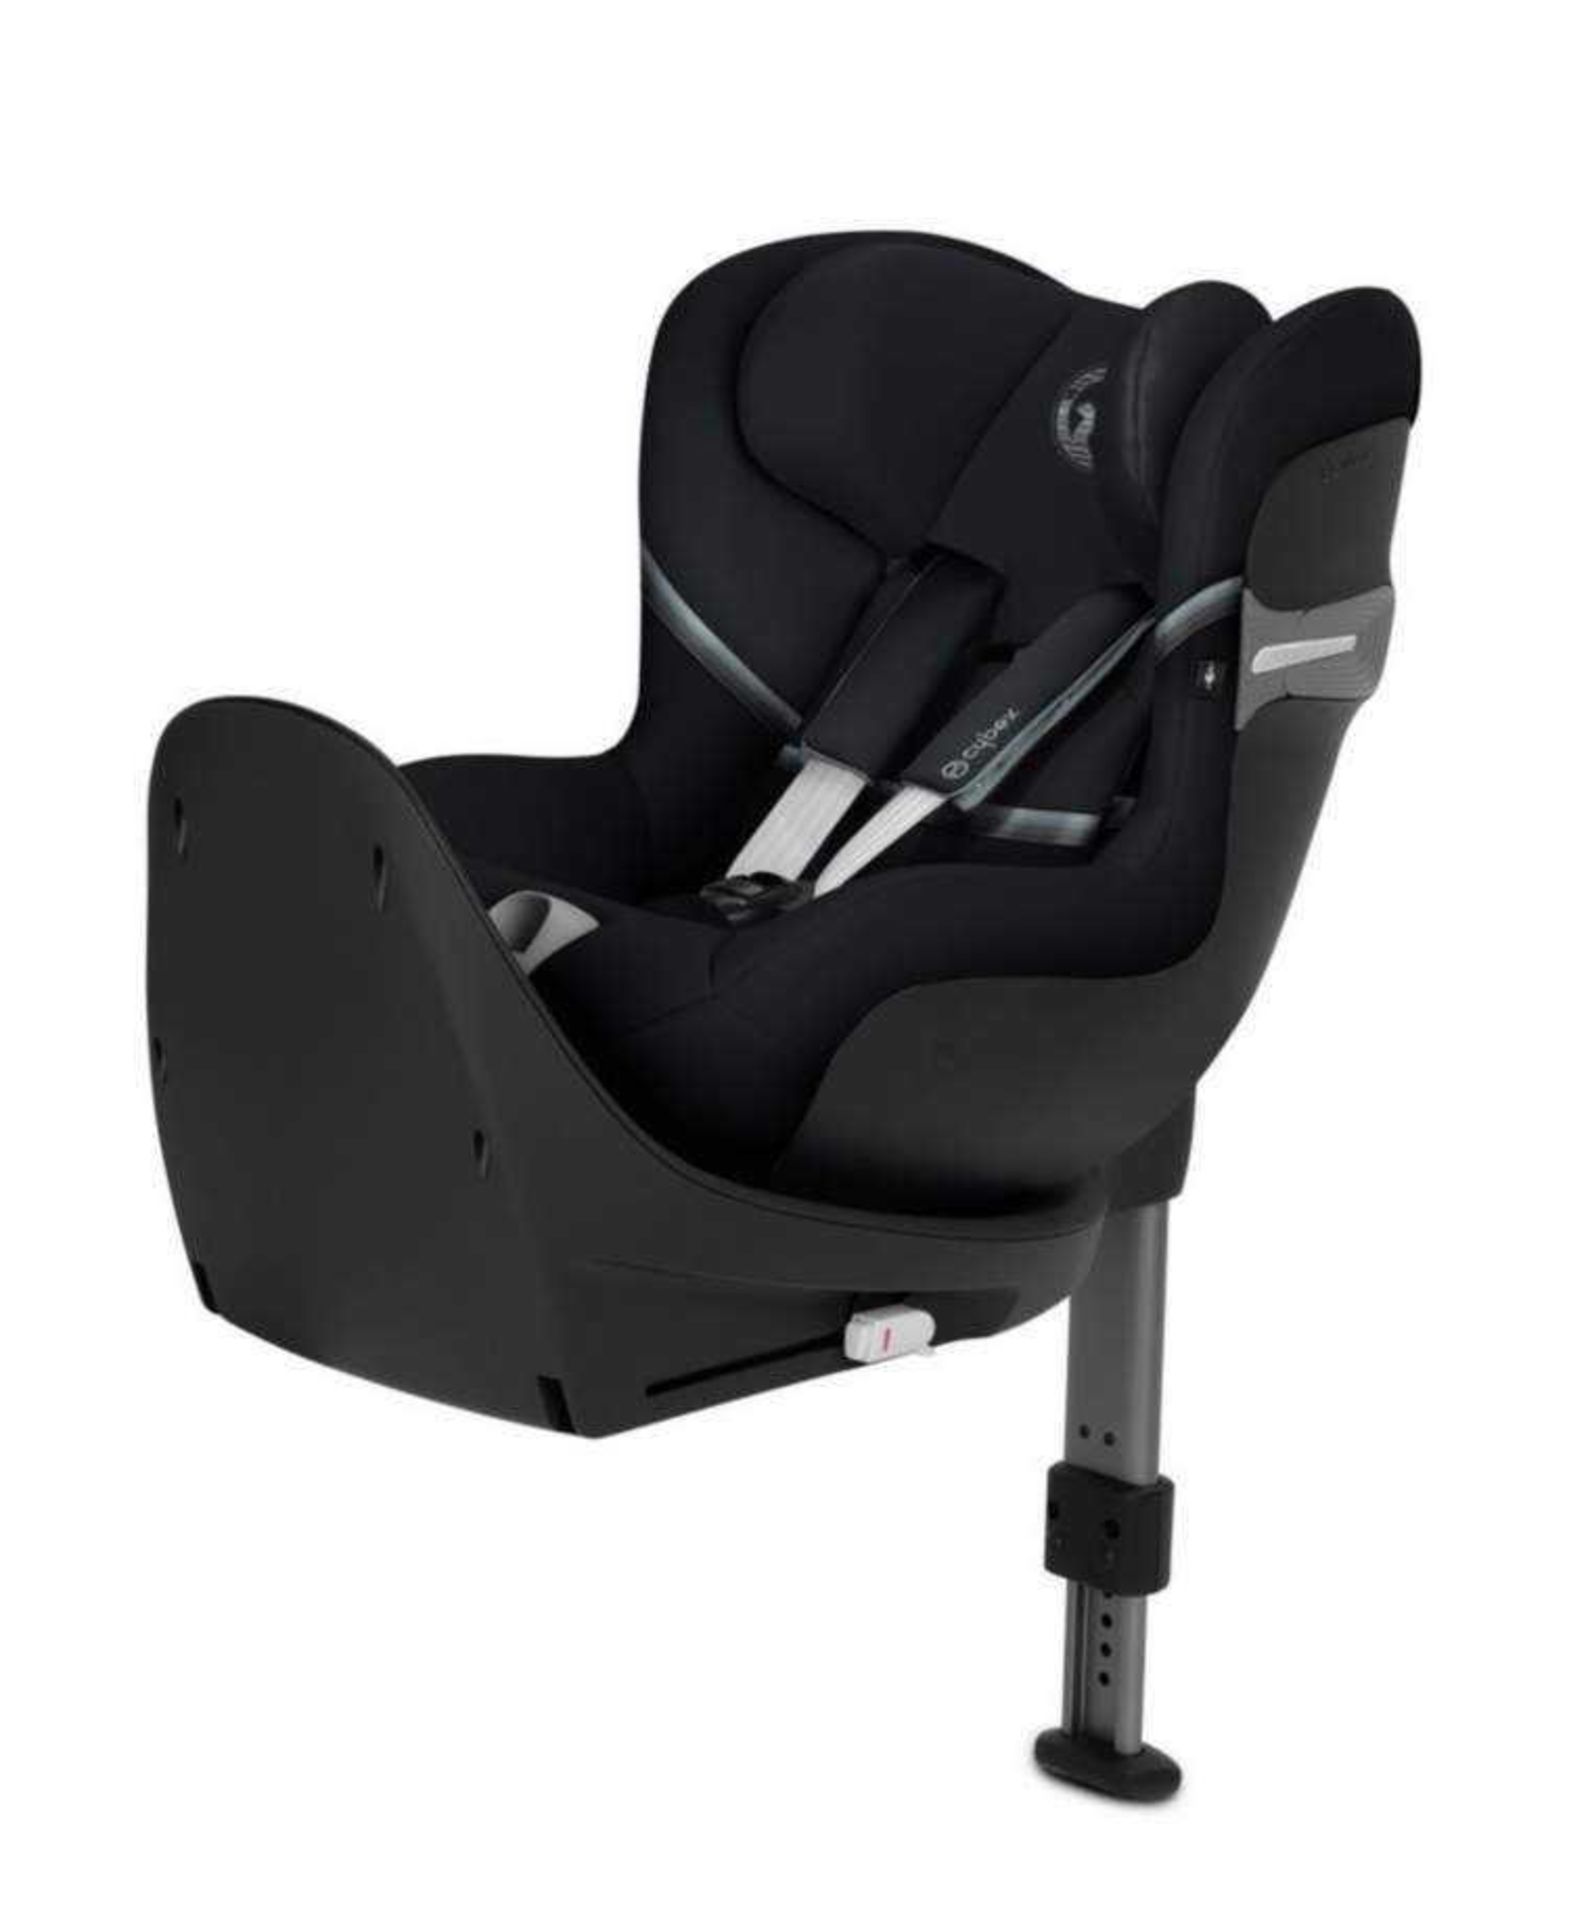 Rrp £280 Cybxex Sirona S I-Size In Car Children'S Safety Seat With Base